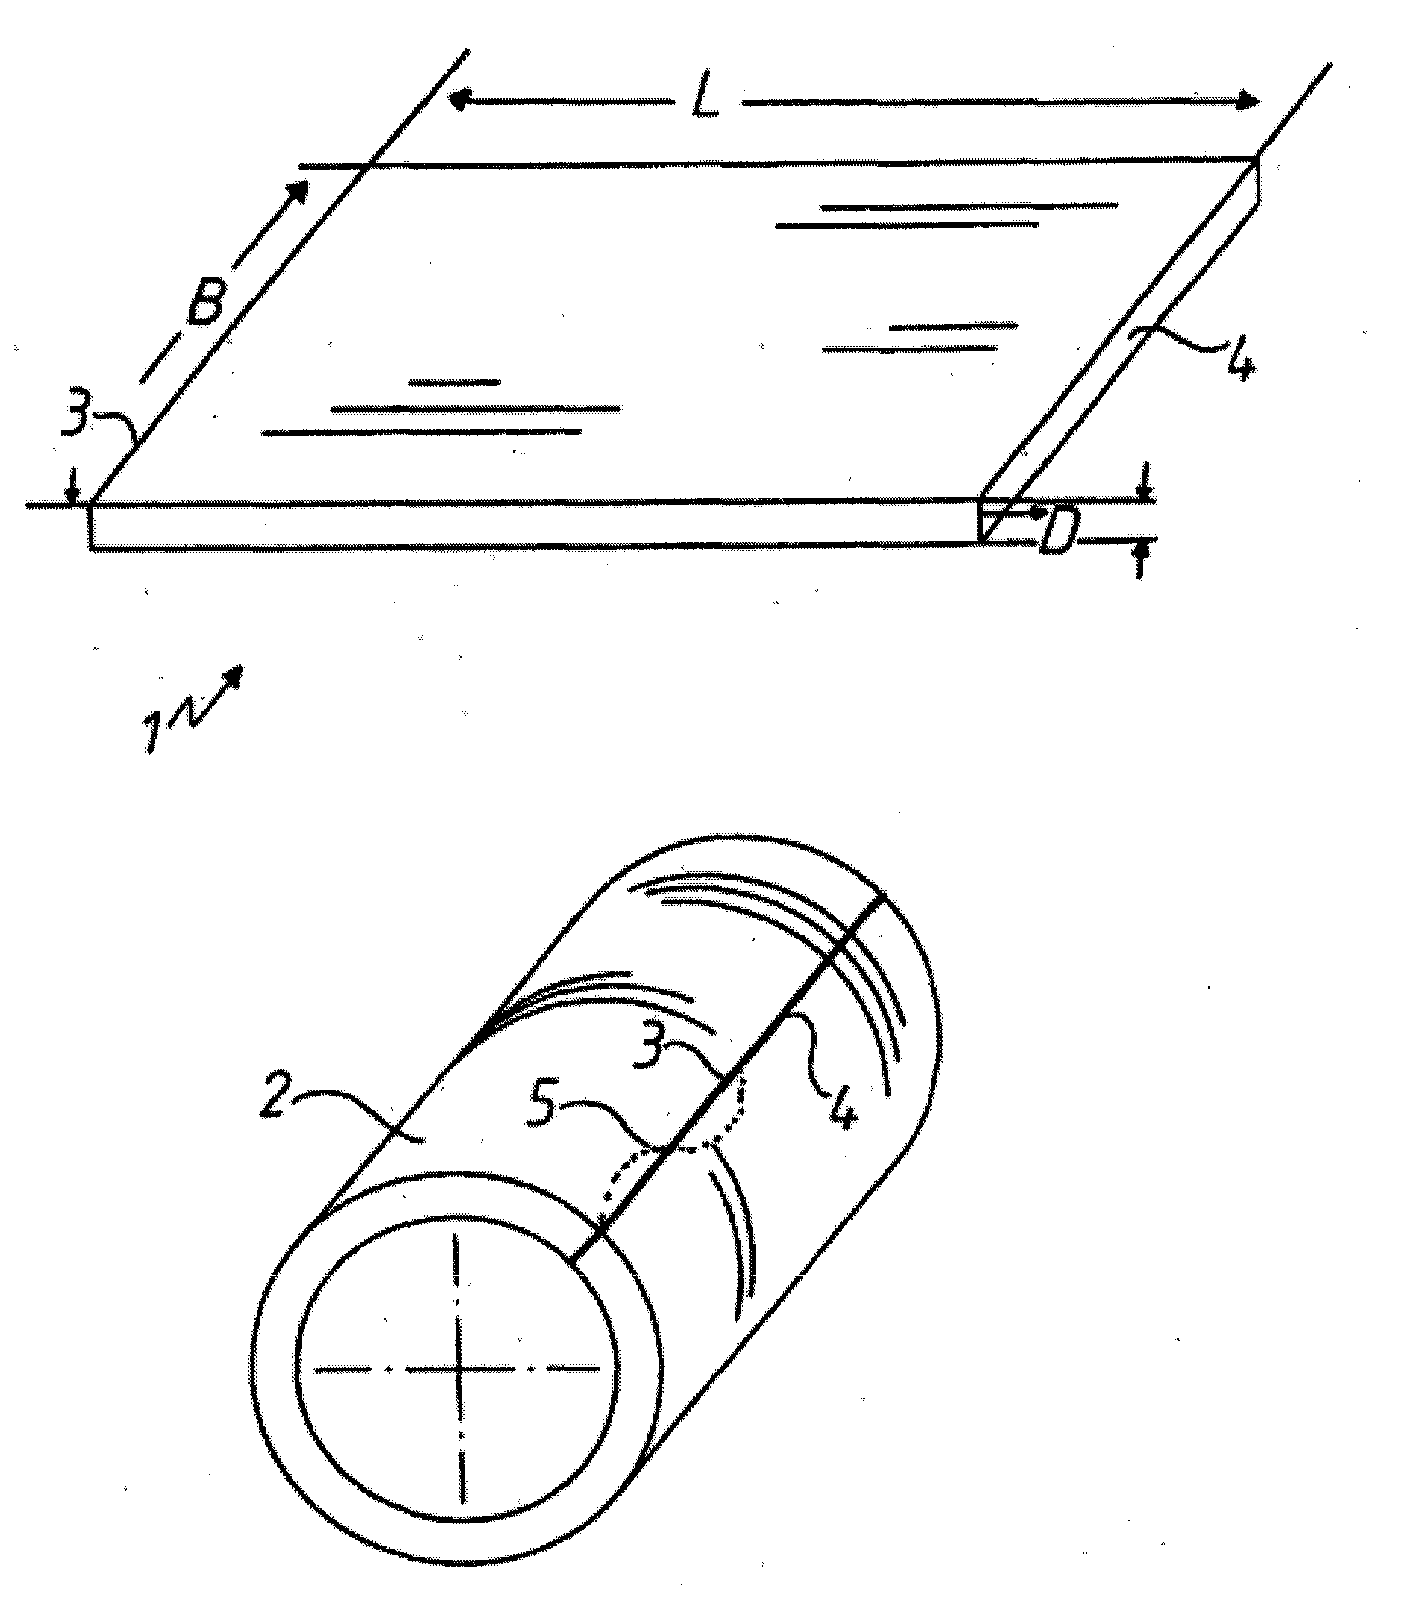 Method for producing metal elements, in particular sealing elements